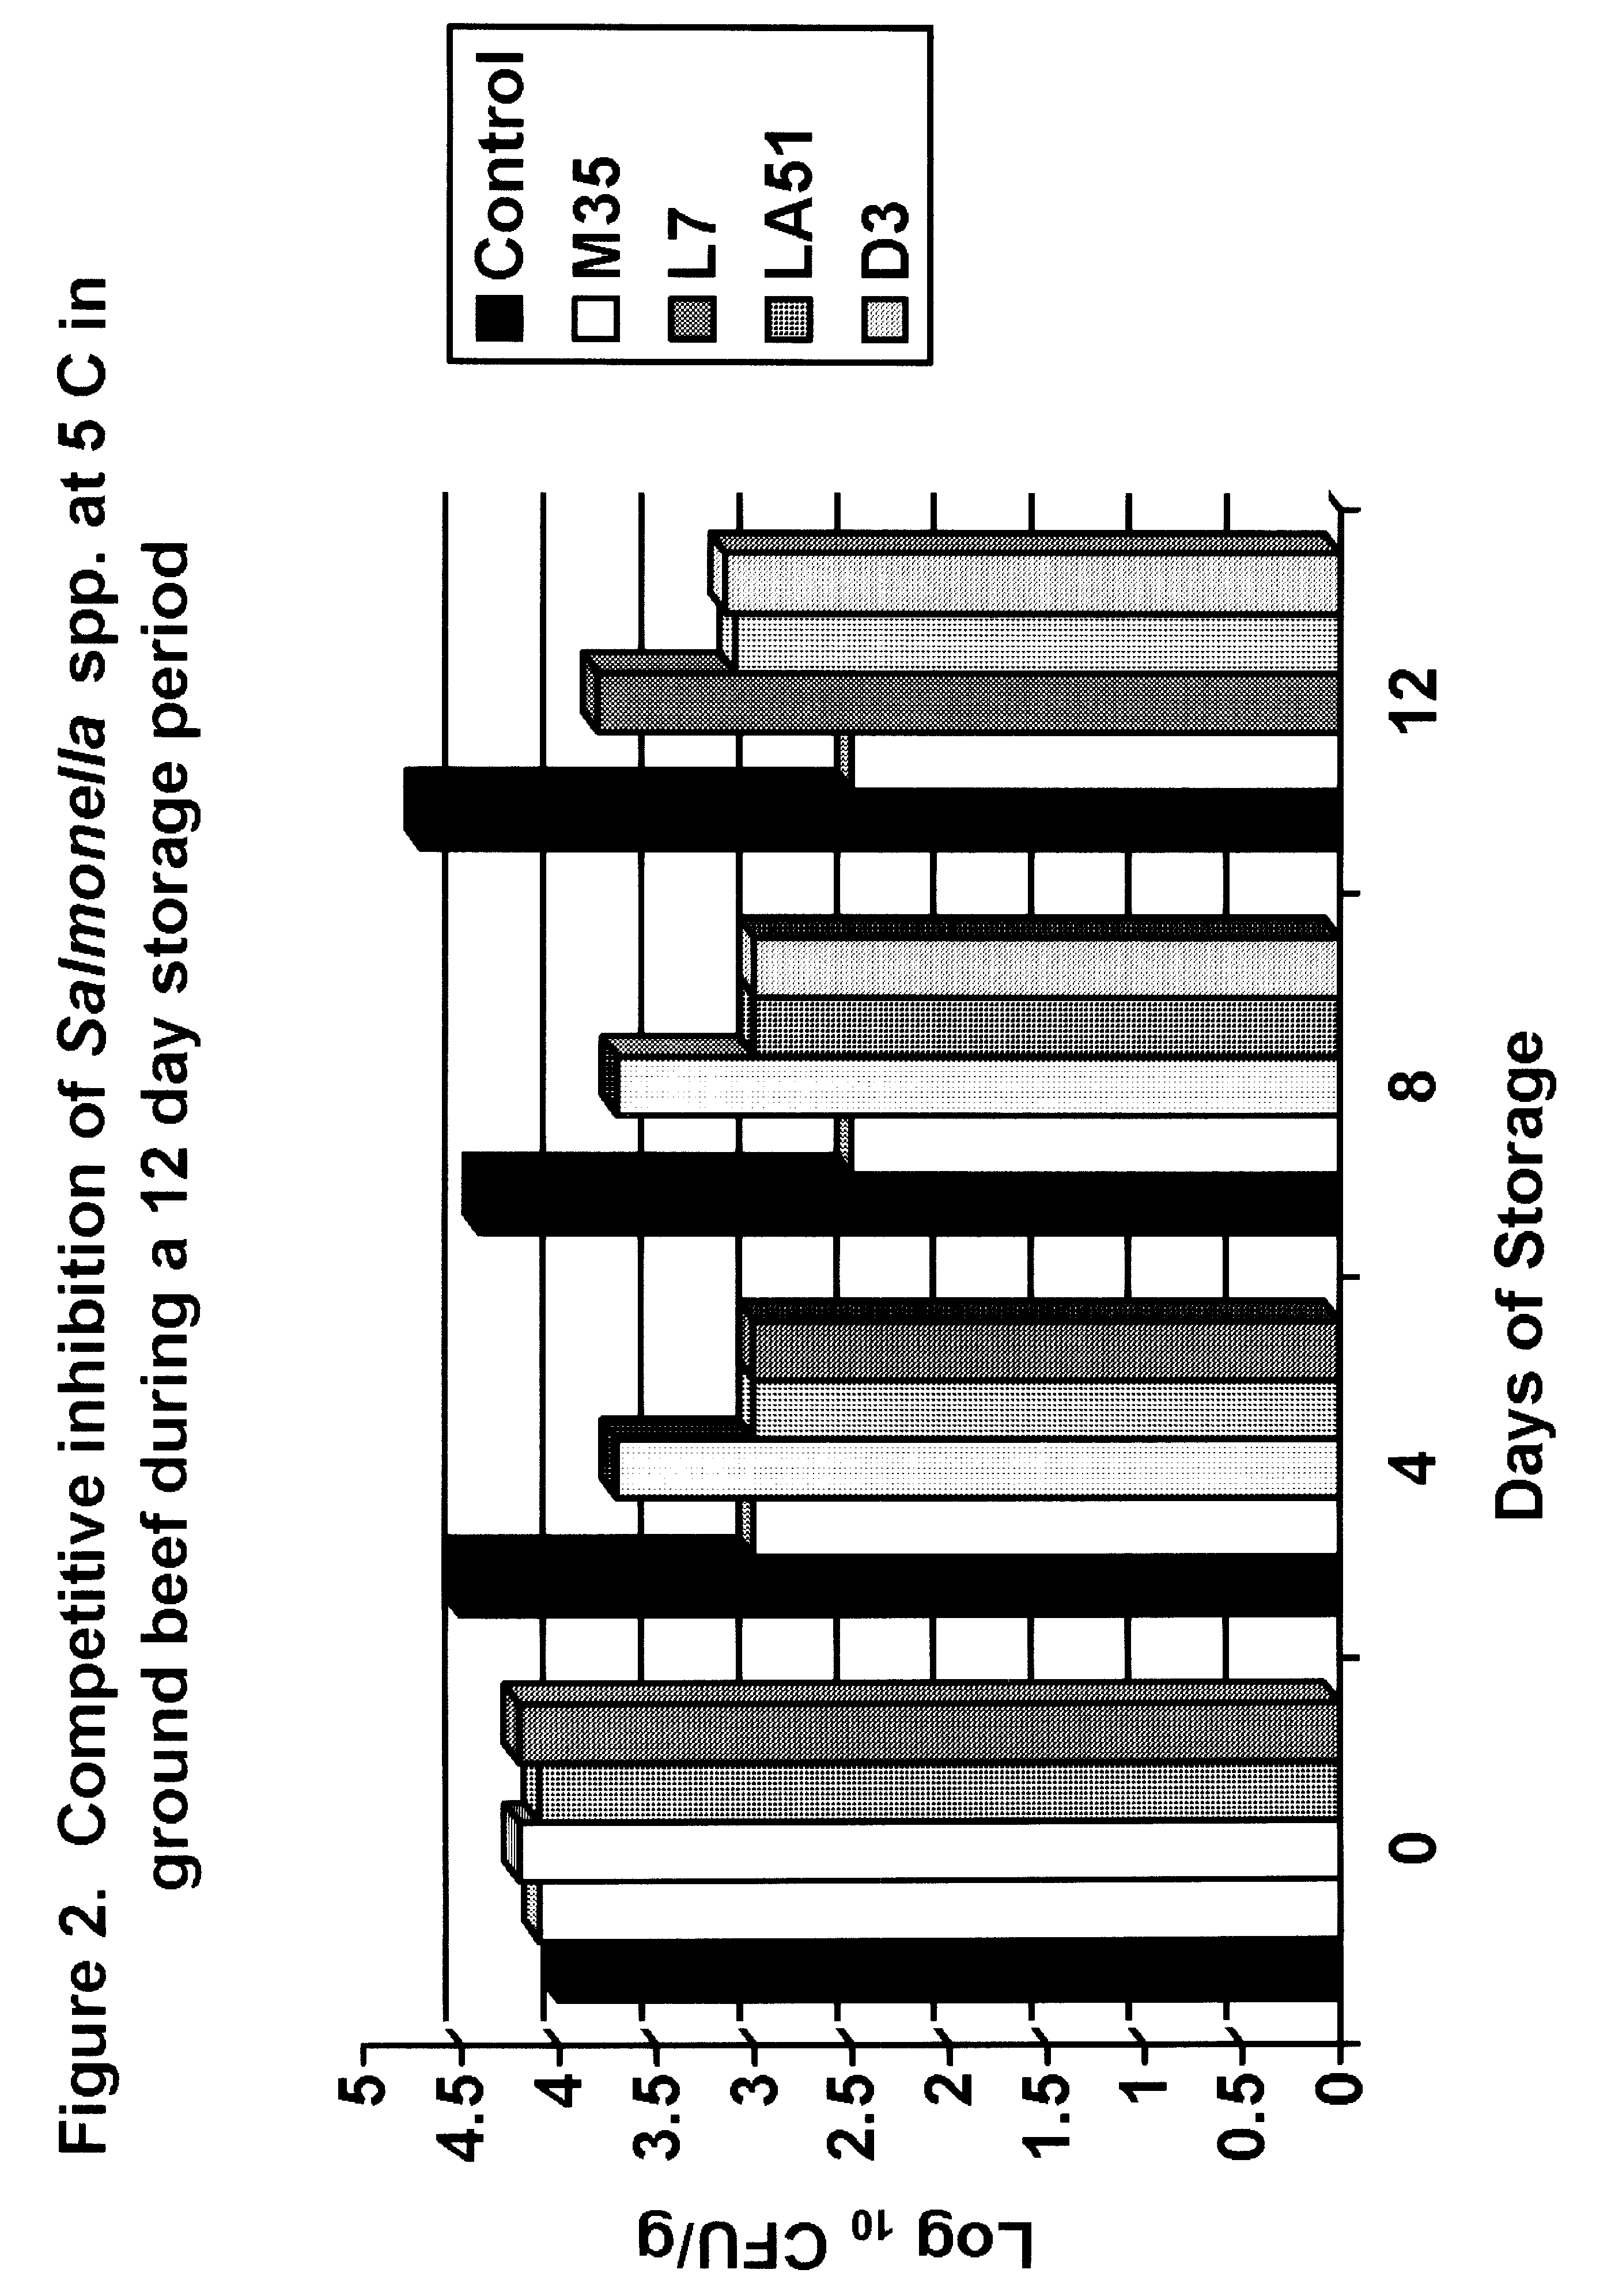 Compositions and methods for reducing the pathogen content of meat and meat products